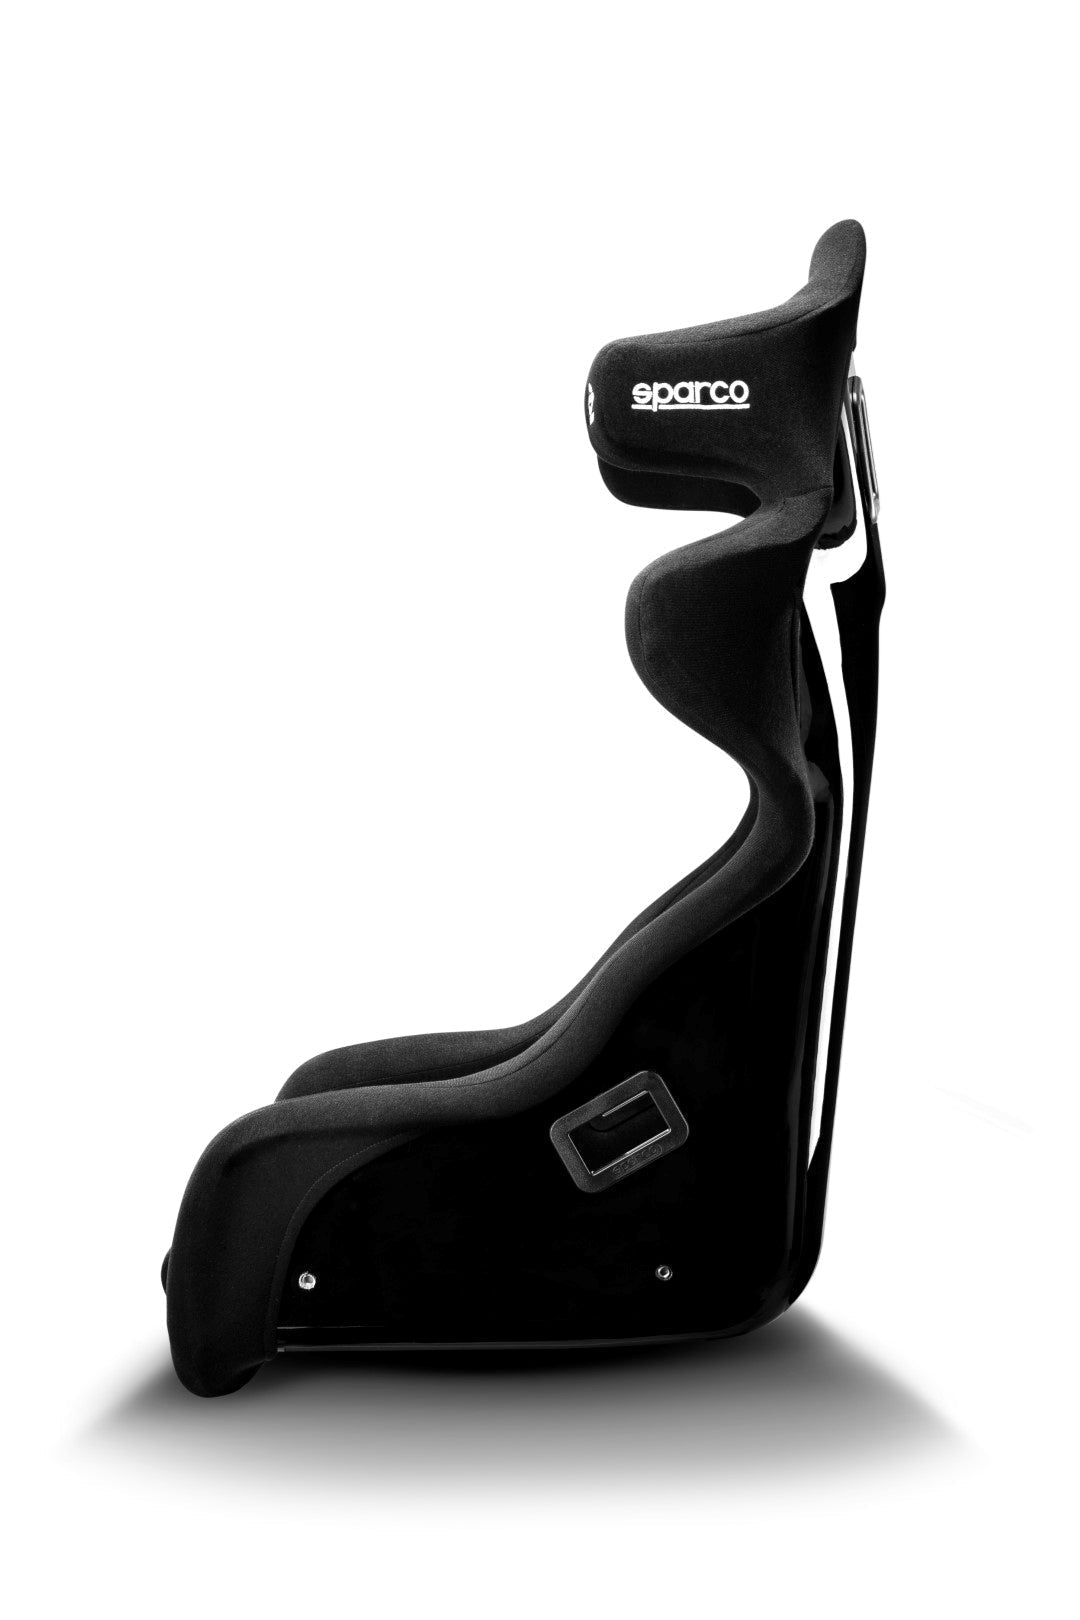 Sparco Pro-ADV Competition Seat Black - Universal - Dirty Racing Products